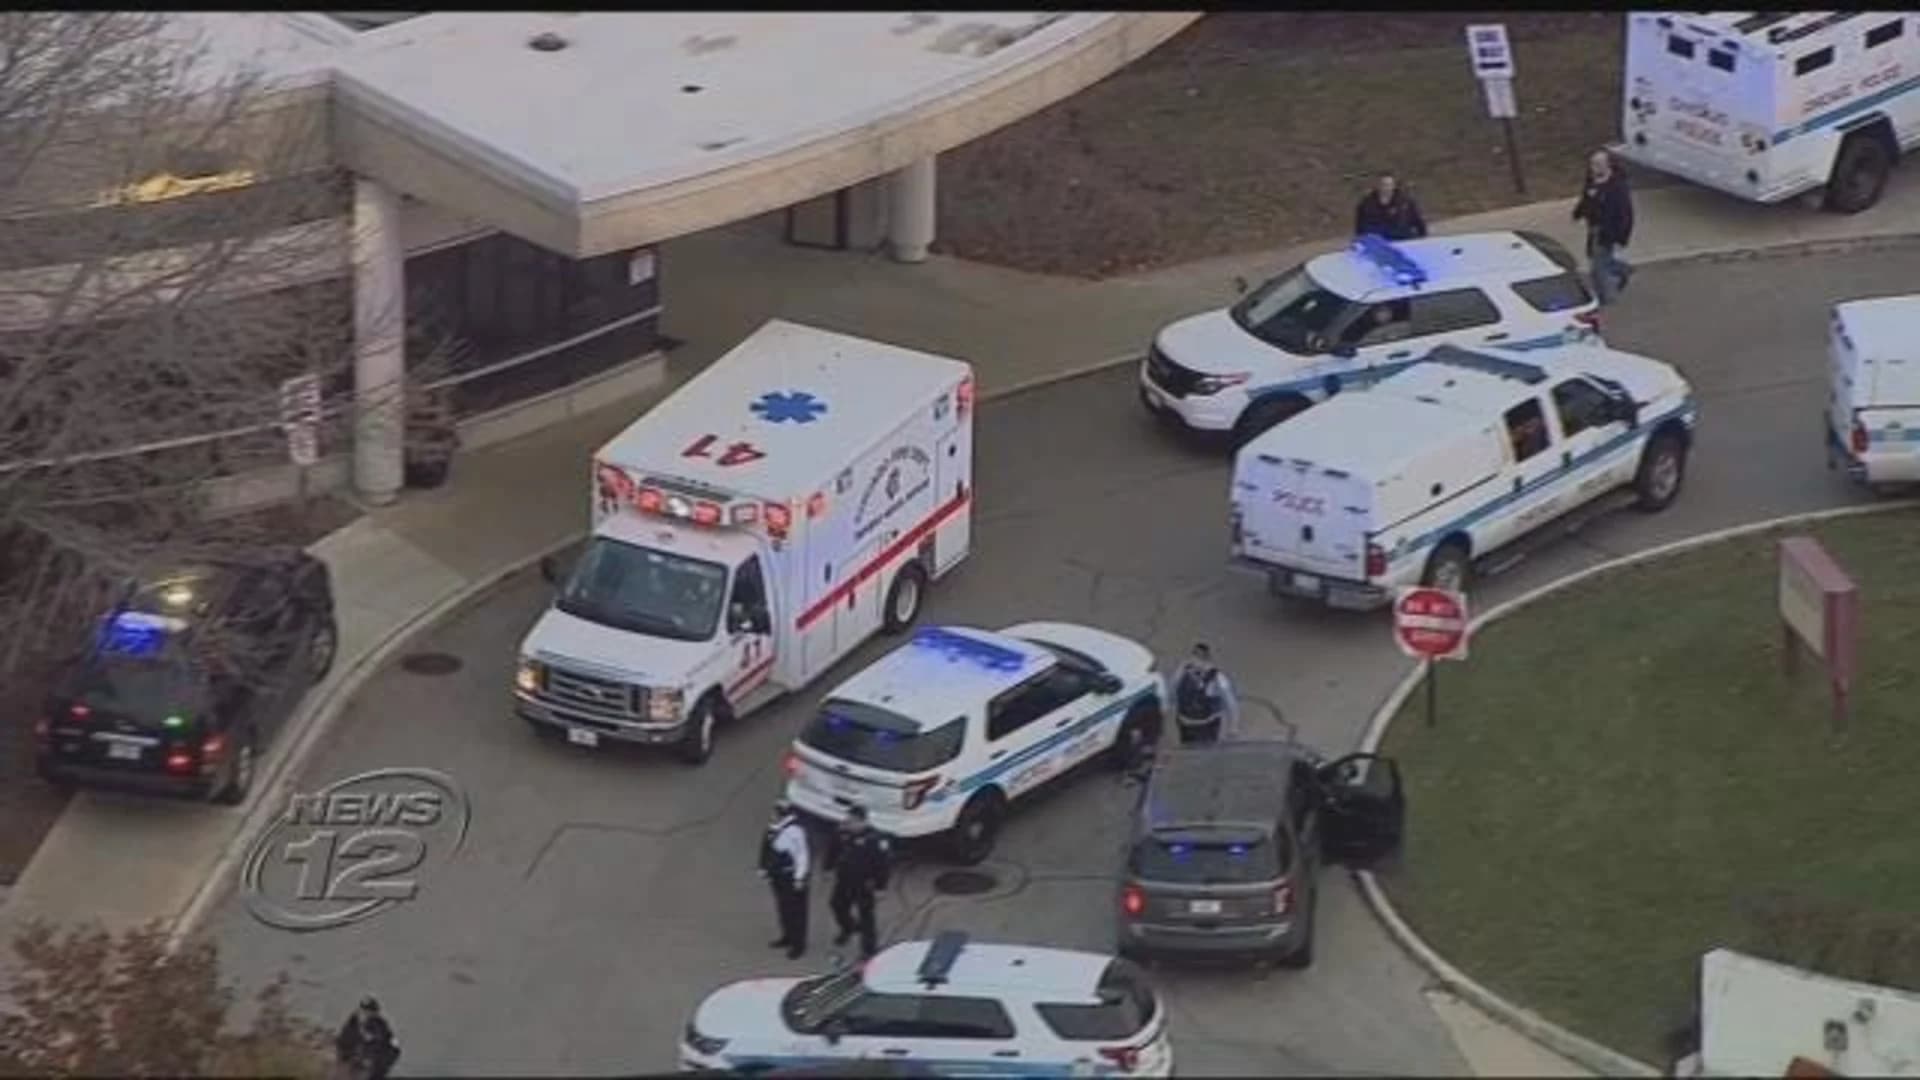 Chicago hospital shooting claims 3 lives; gunman also dead